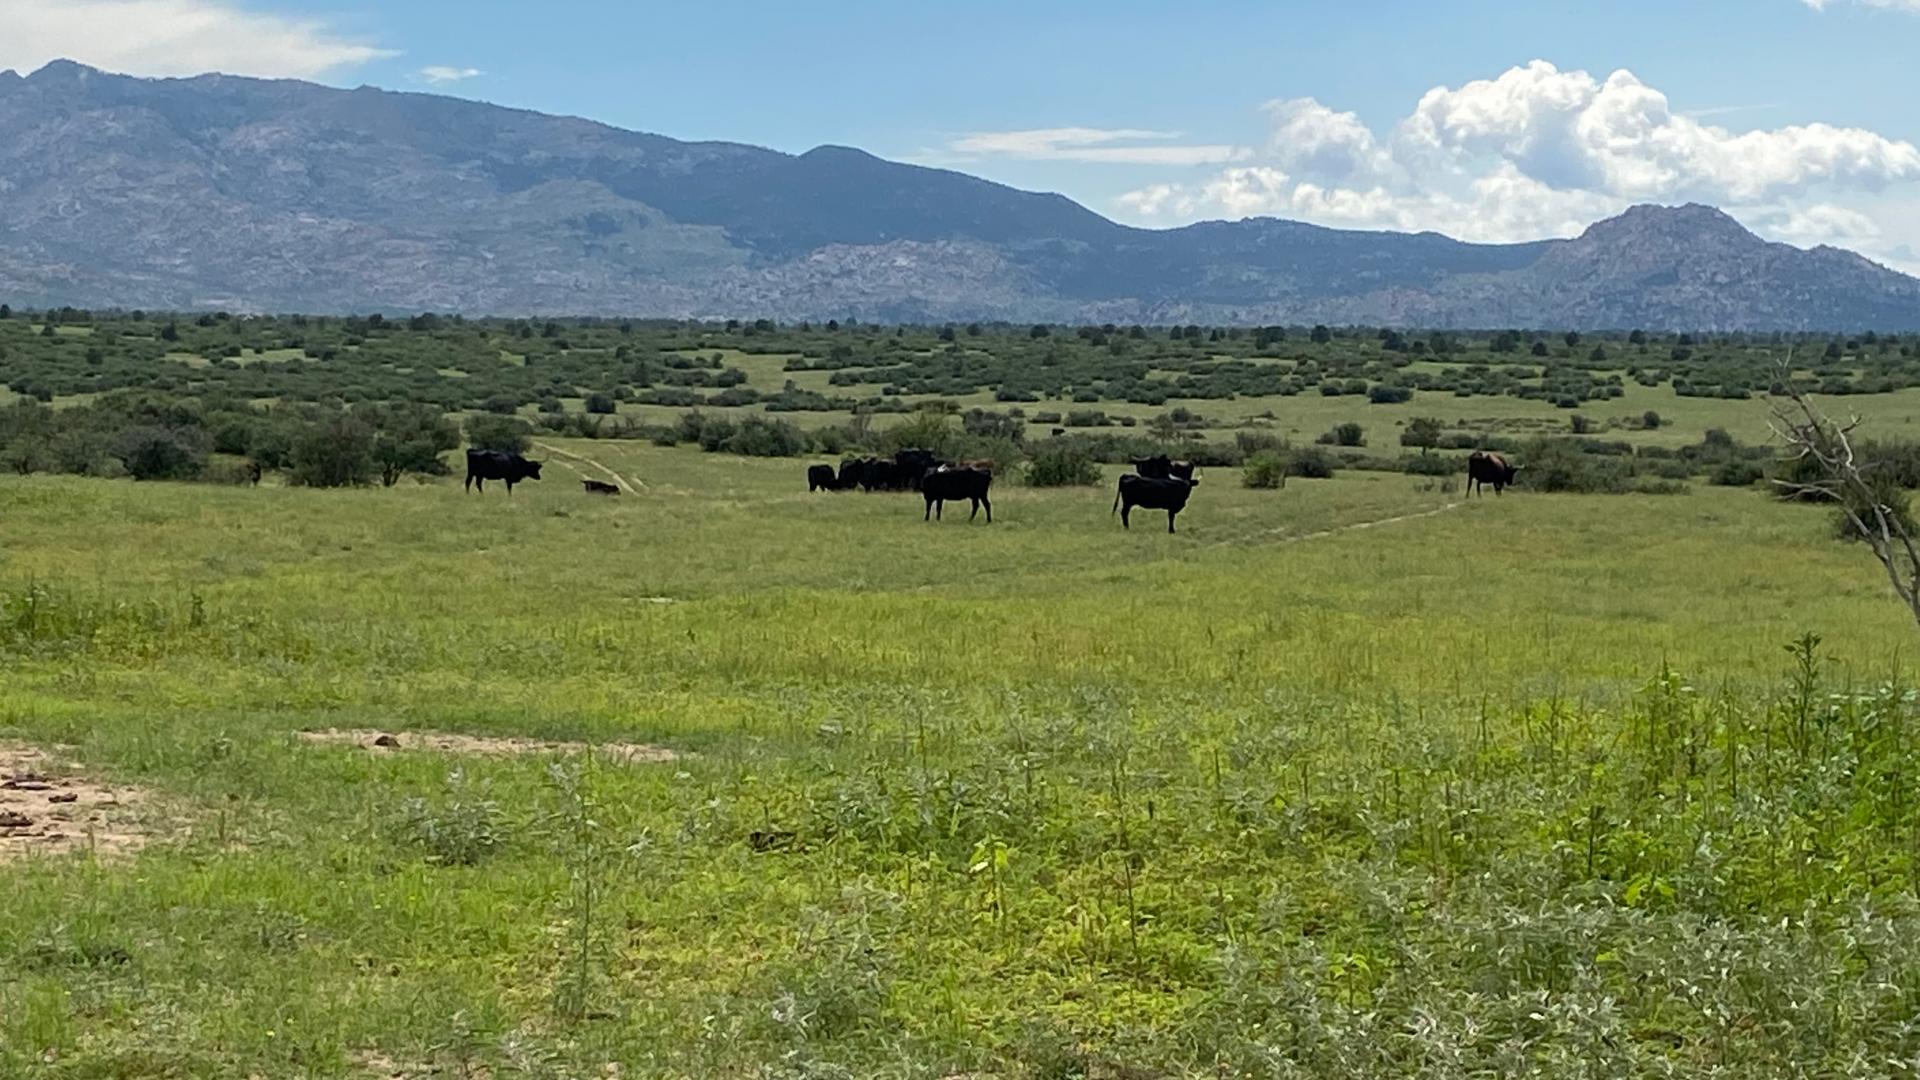 Cattle grazing on grass with mountains in backgrounnd